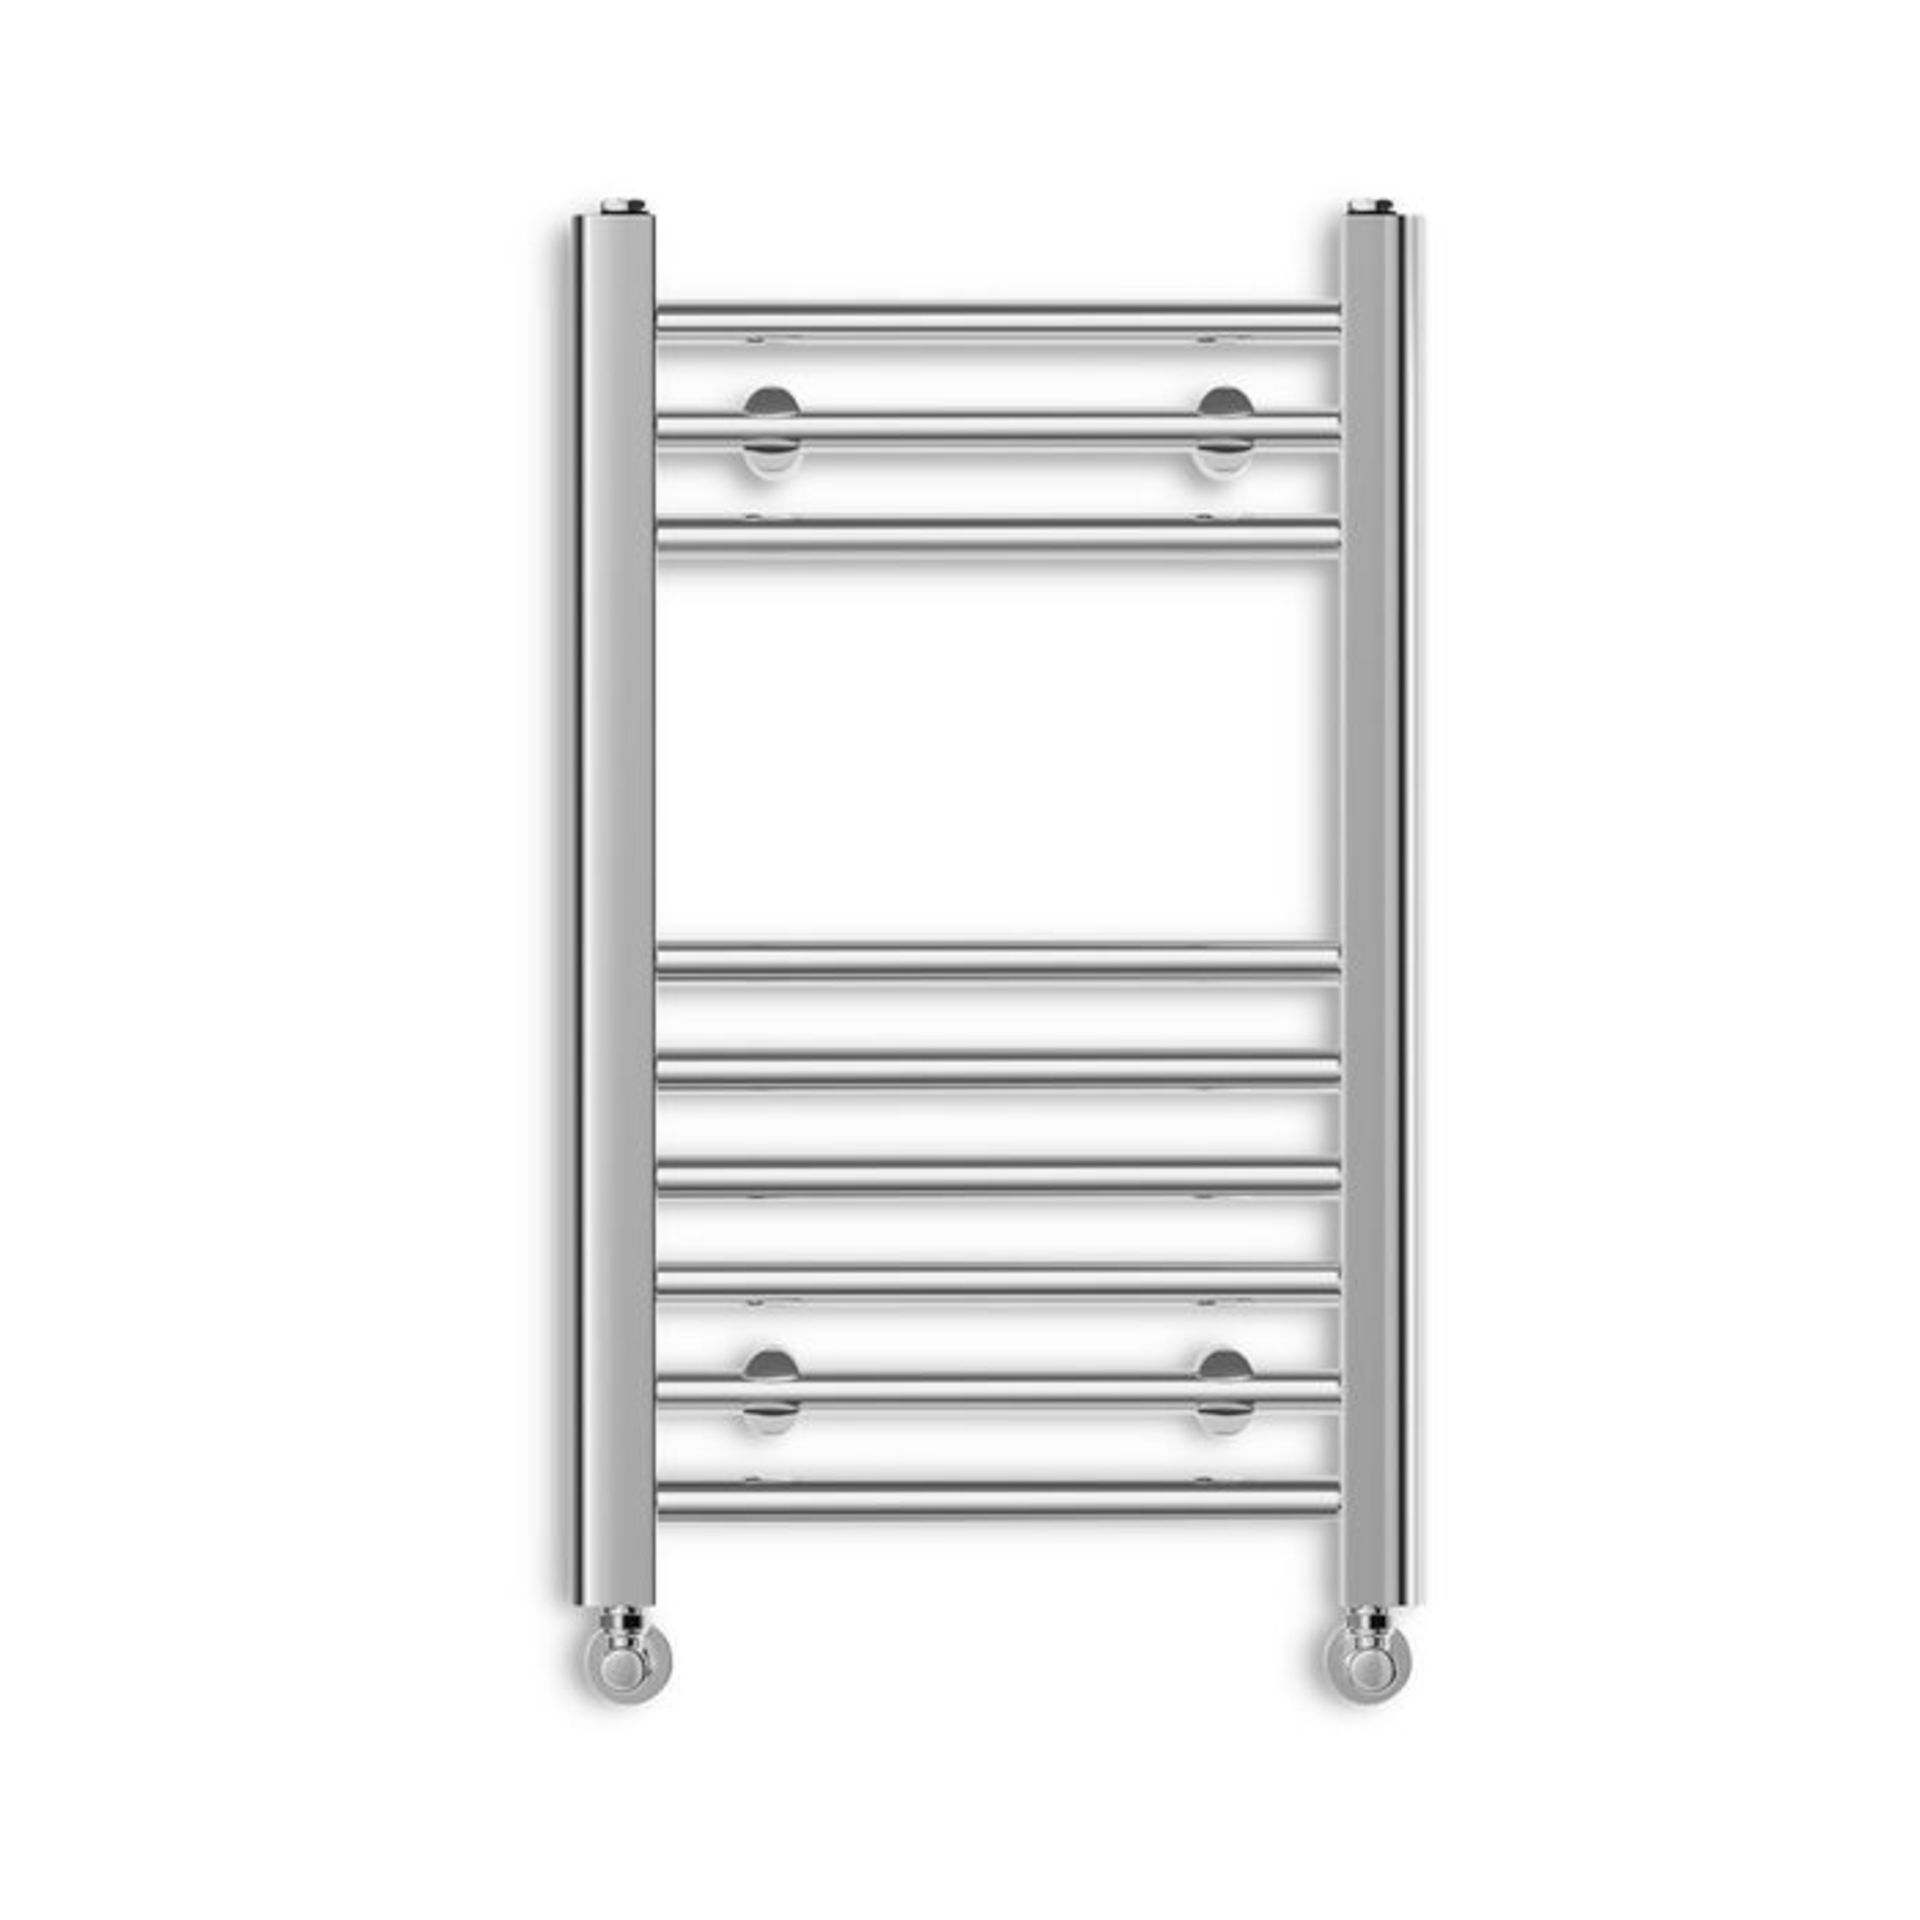 (EY11) 650x400mm Straight Heated Towel Radiator. Low carbon steel chrome plated radiator. This - Image 3 of 3